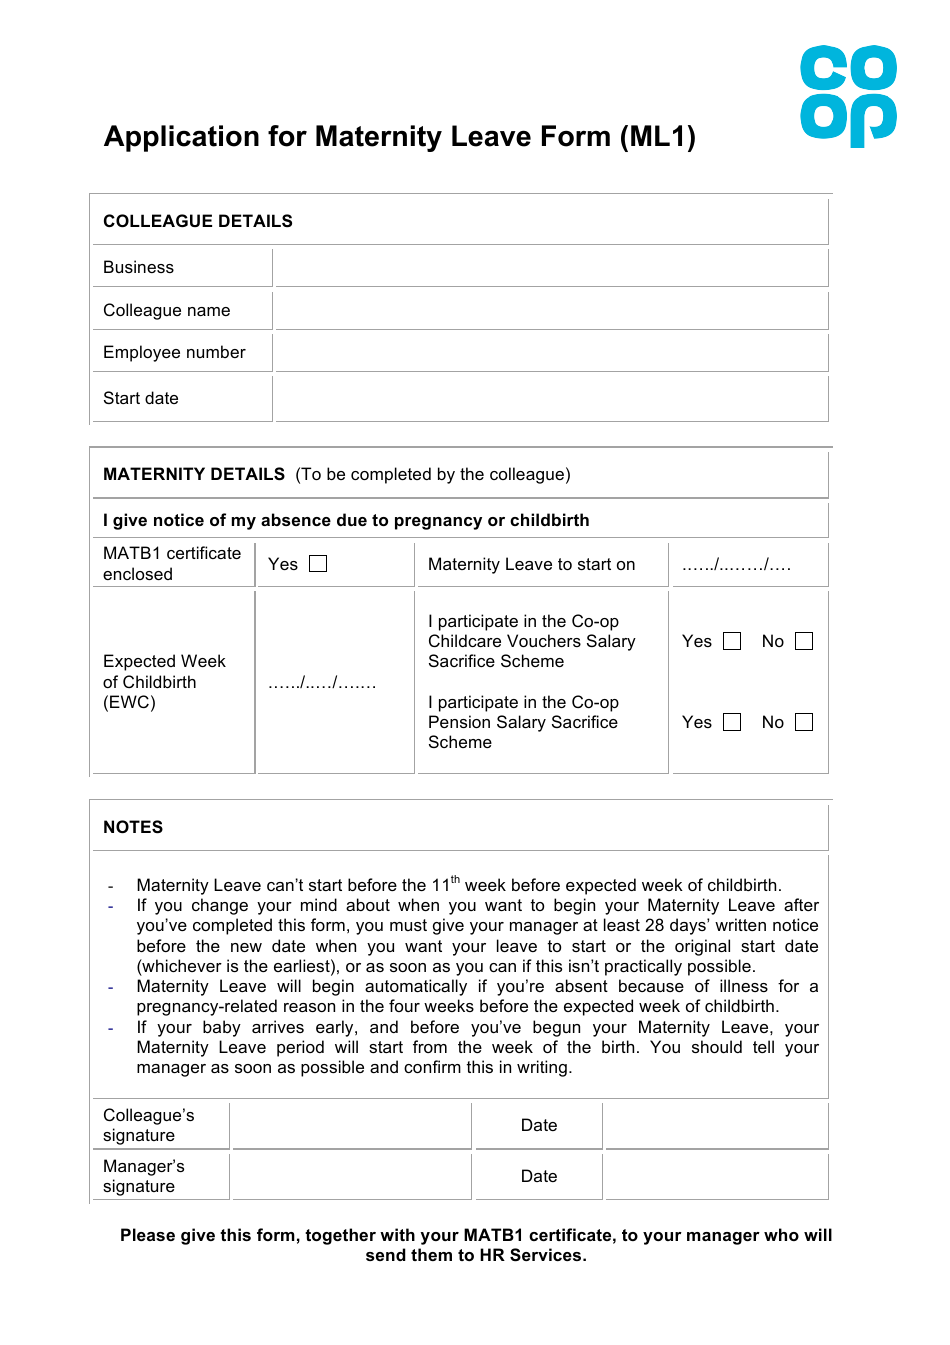 application-for-maternity-leave-form-co-op-download-printable-pdf